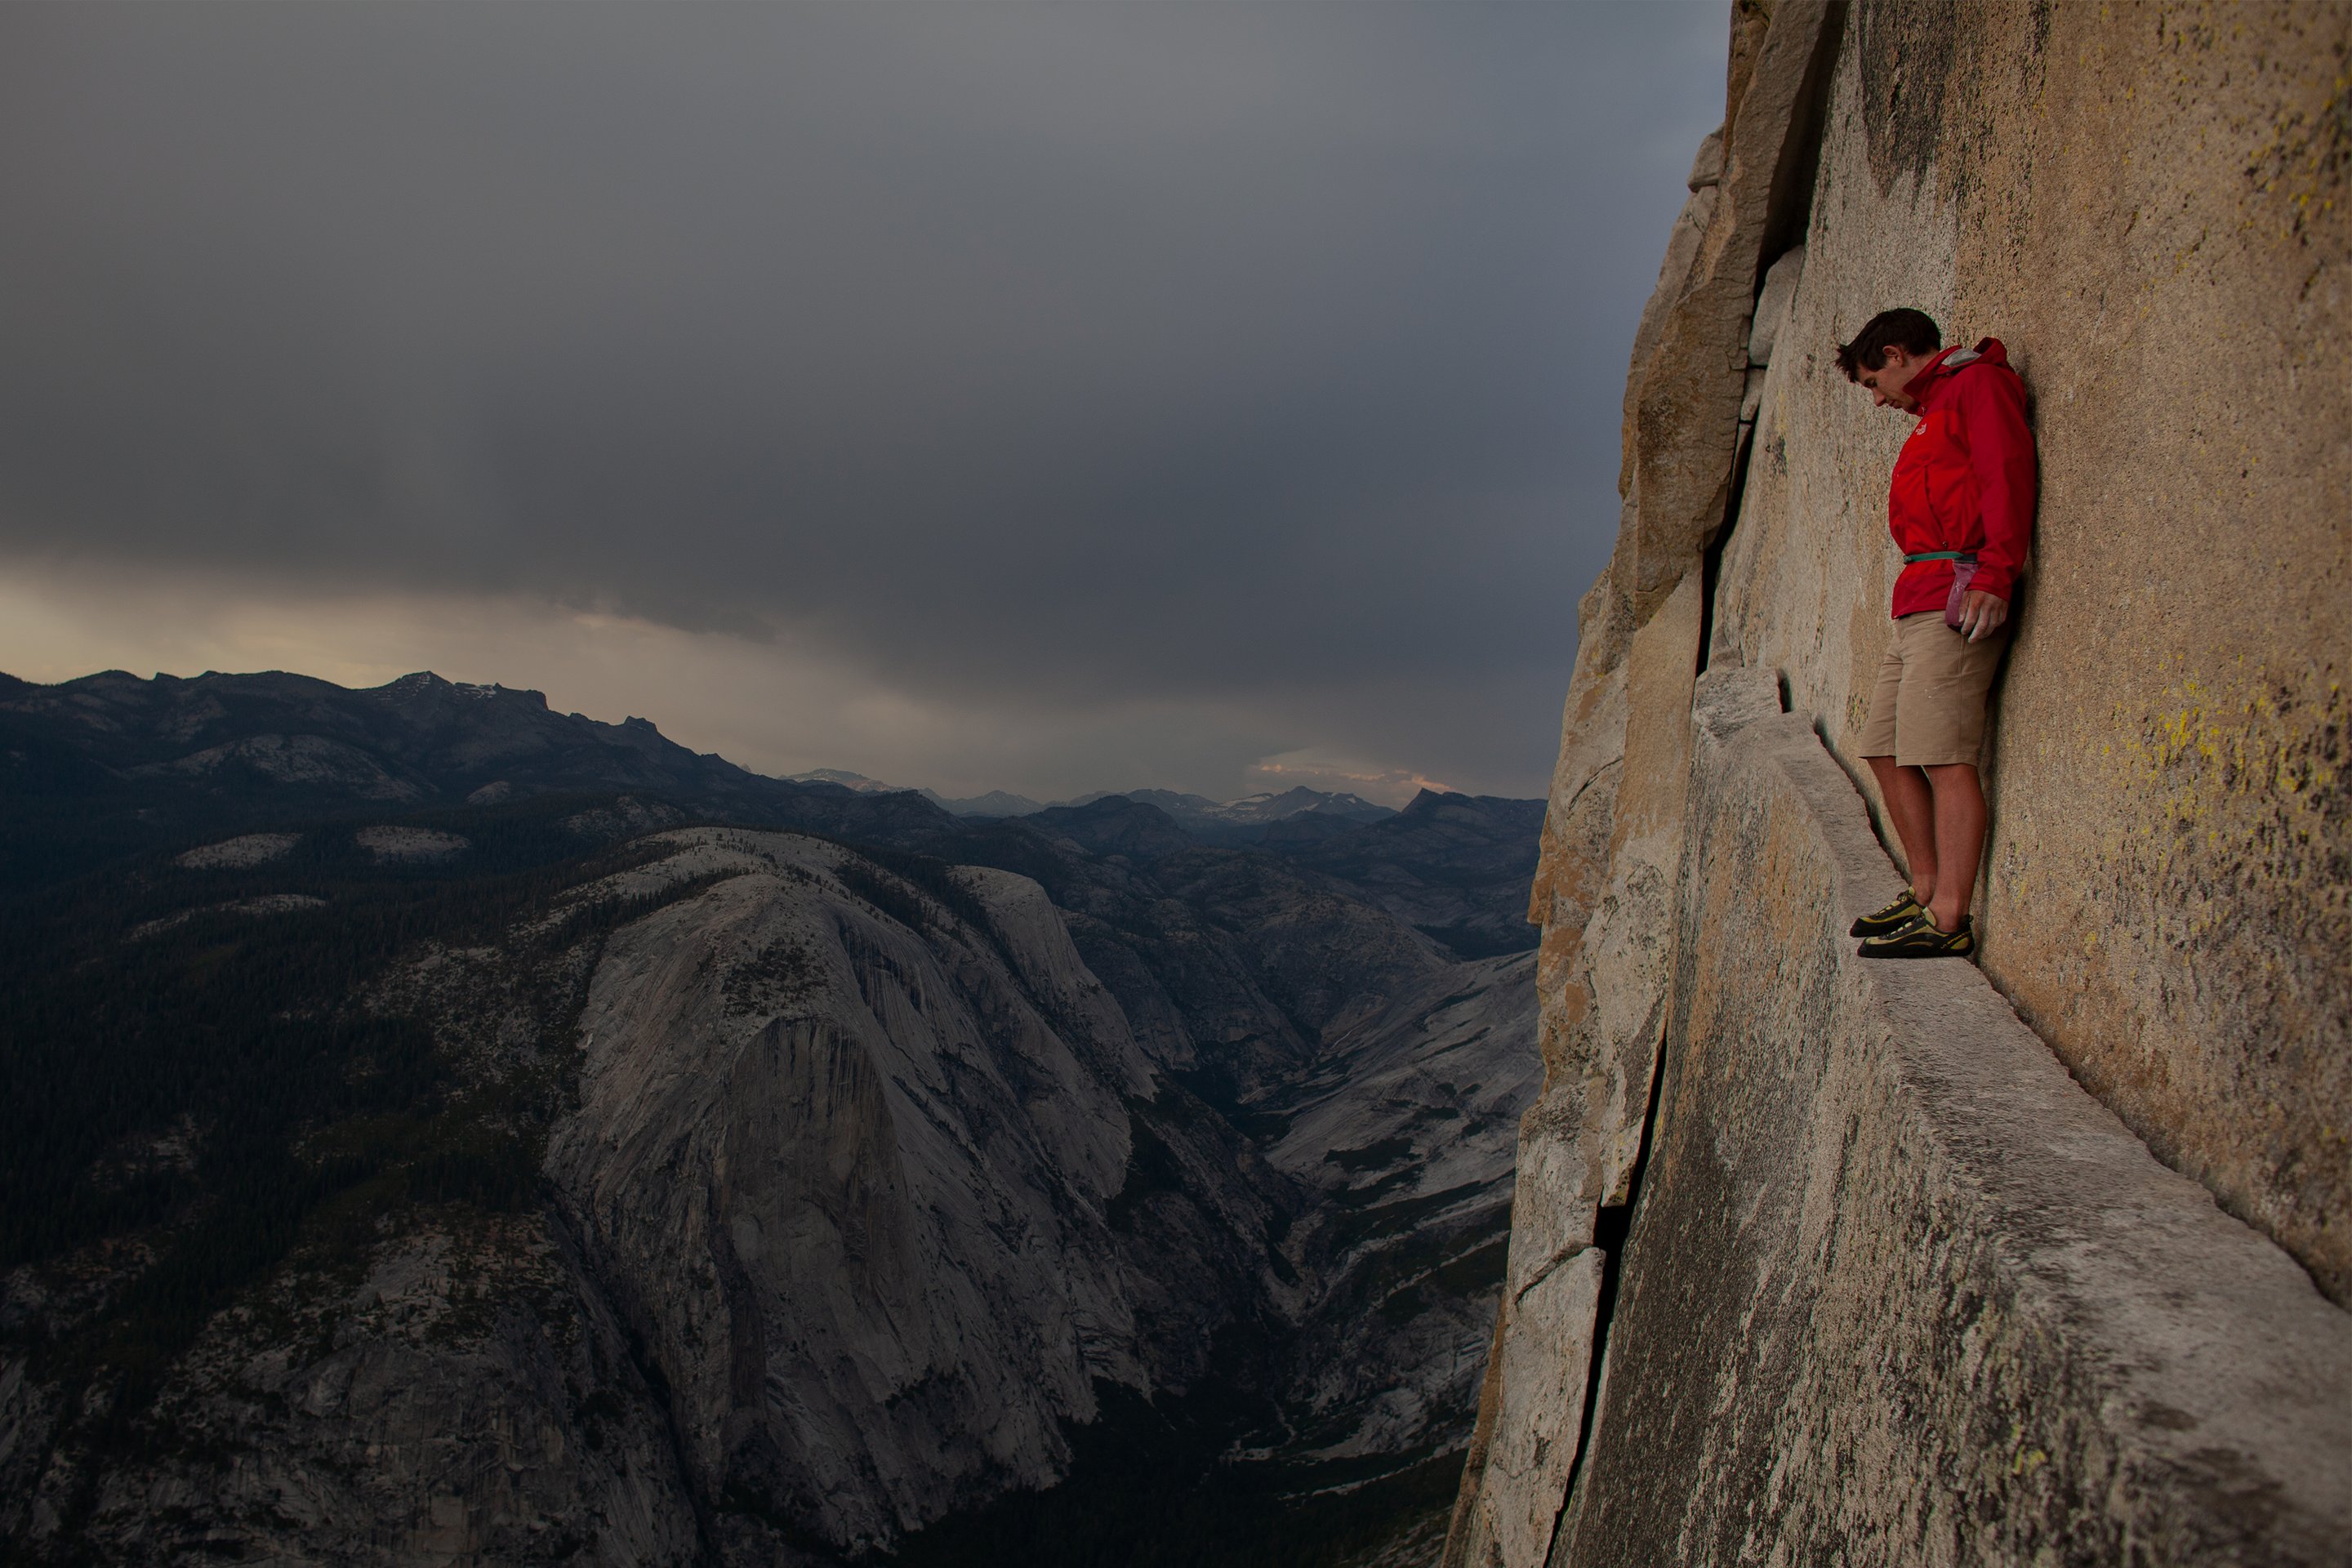 Climber, Alex Honnold, looks down on the Yosemite Valley from an exposed ledge.